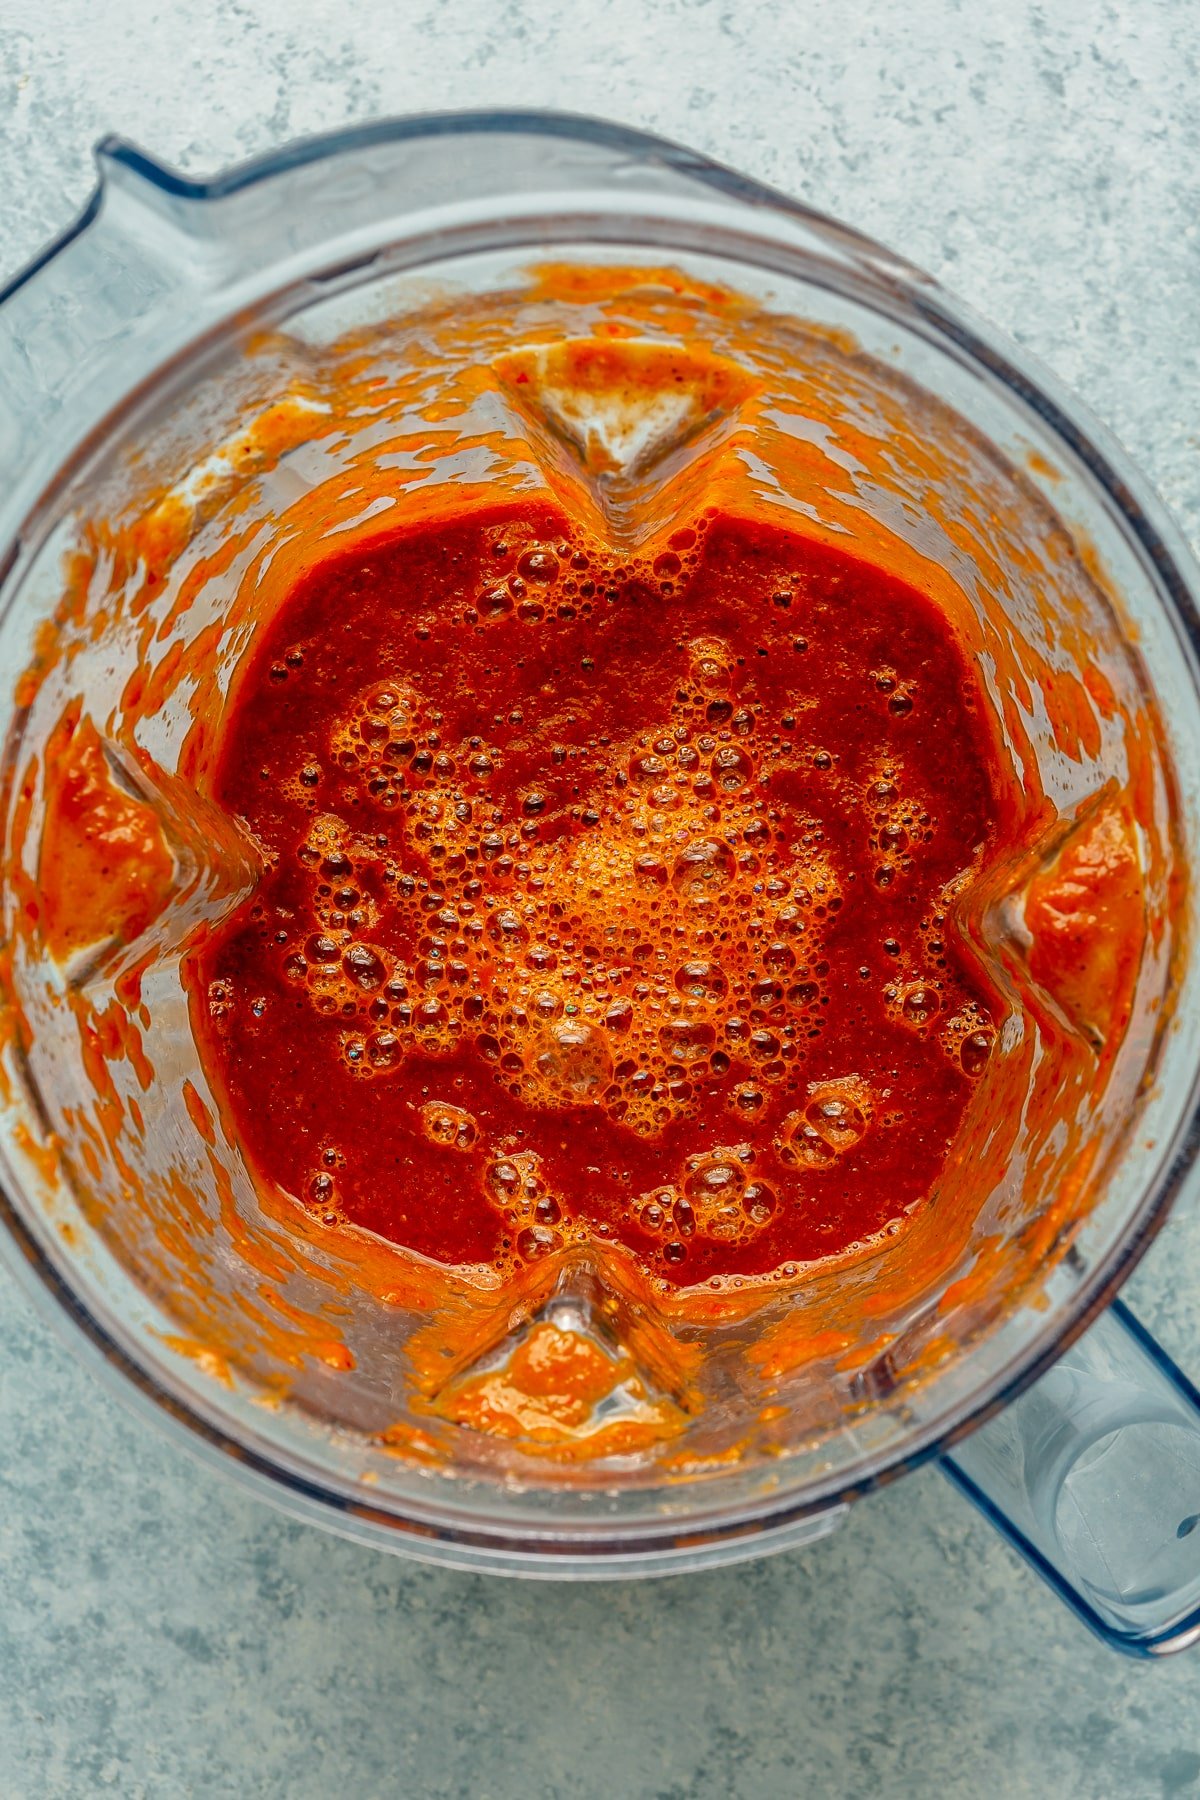 Ingredients have been moved into a blender and been blended to create a bright red saucy mixture.